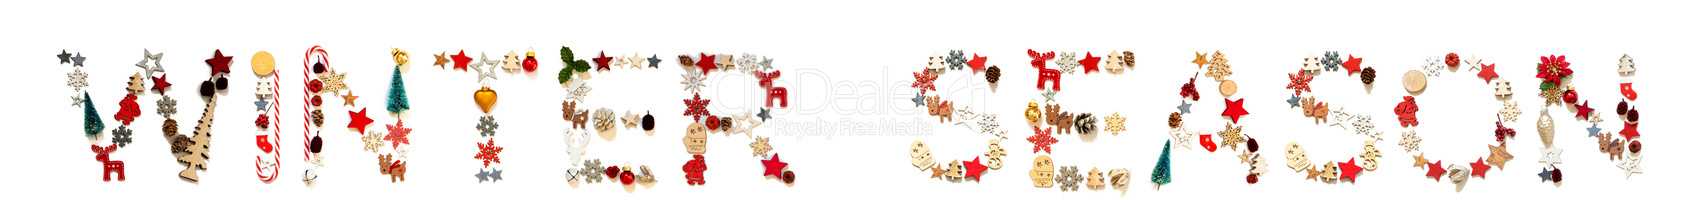 Colorful Christmas Decoration Letter Building Word Winter Season